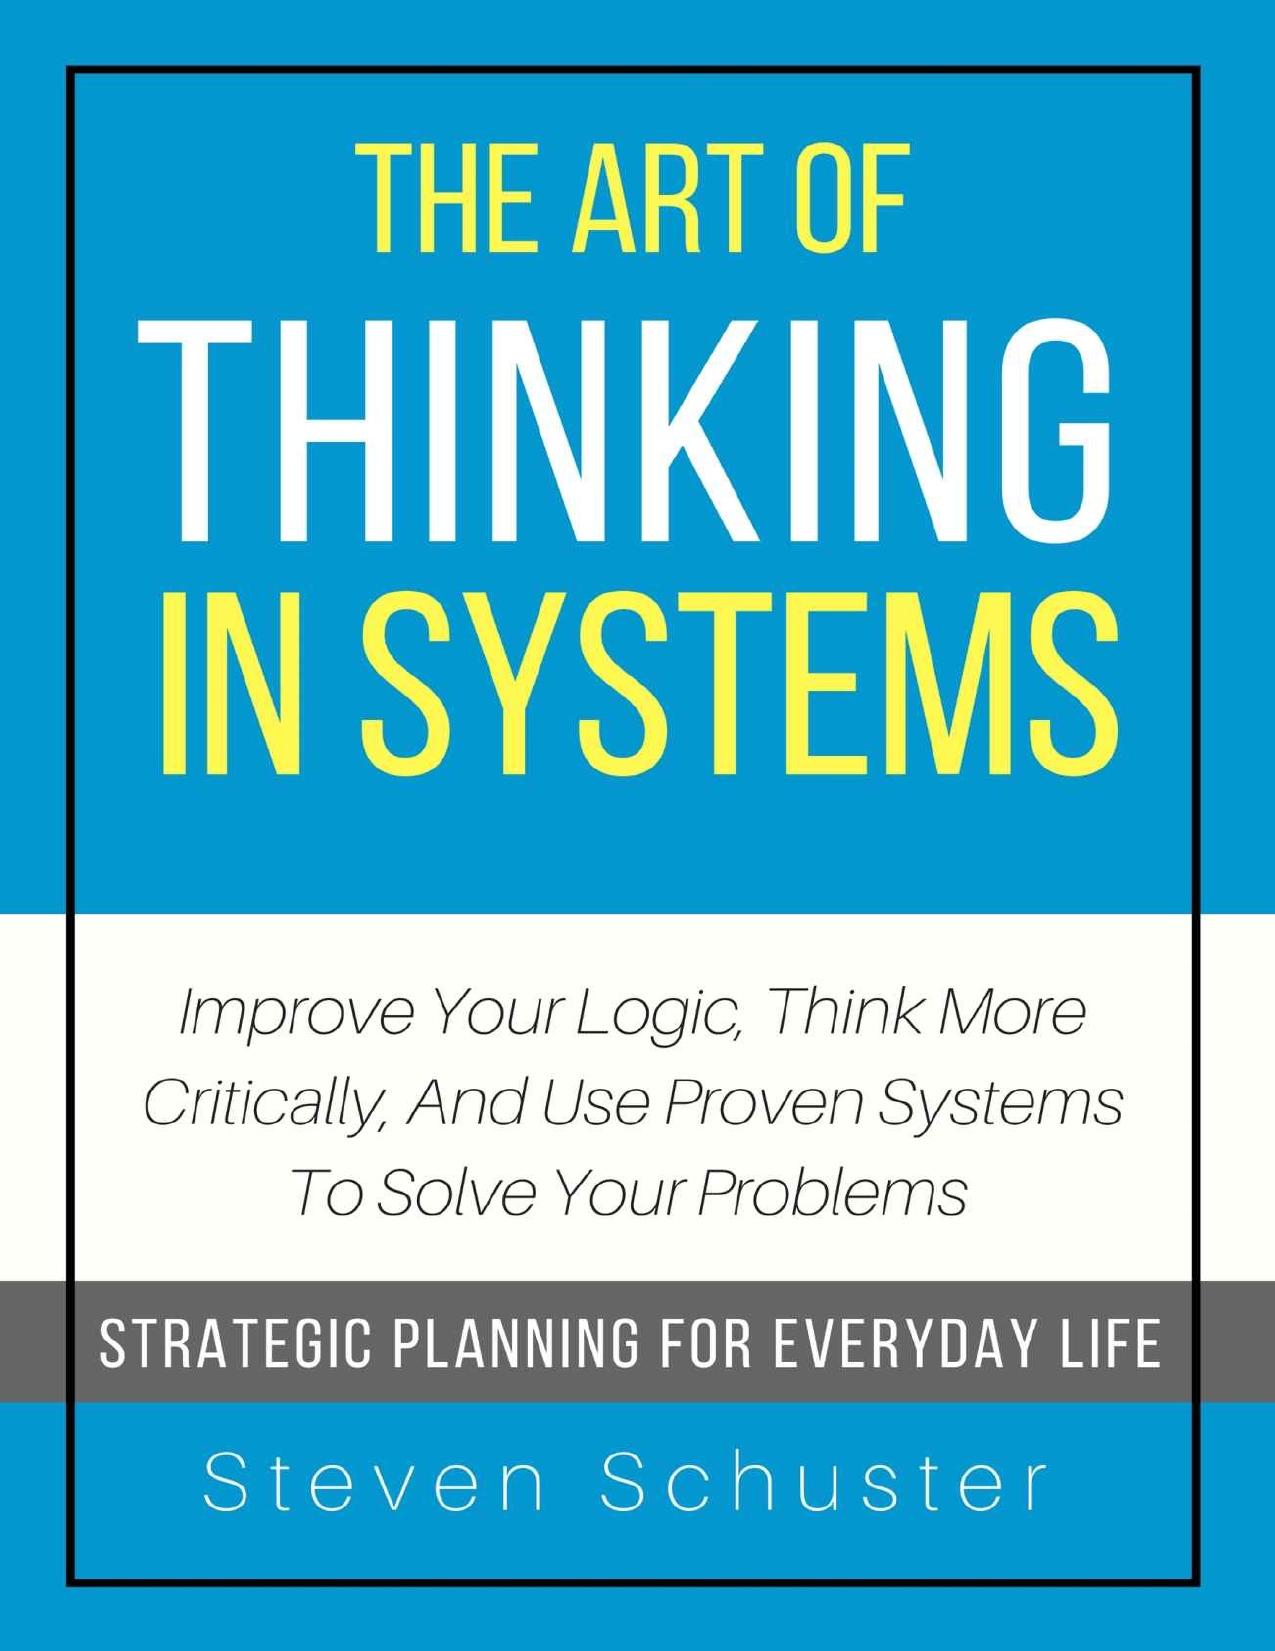 The Art Of Thinking In Systems: Improve Your Logic, Think More Critically, And Use Proven Systems To Solve Your Problems - Strategic Planning For Everyday Life - PDFDrive.com